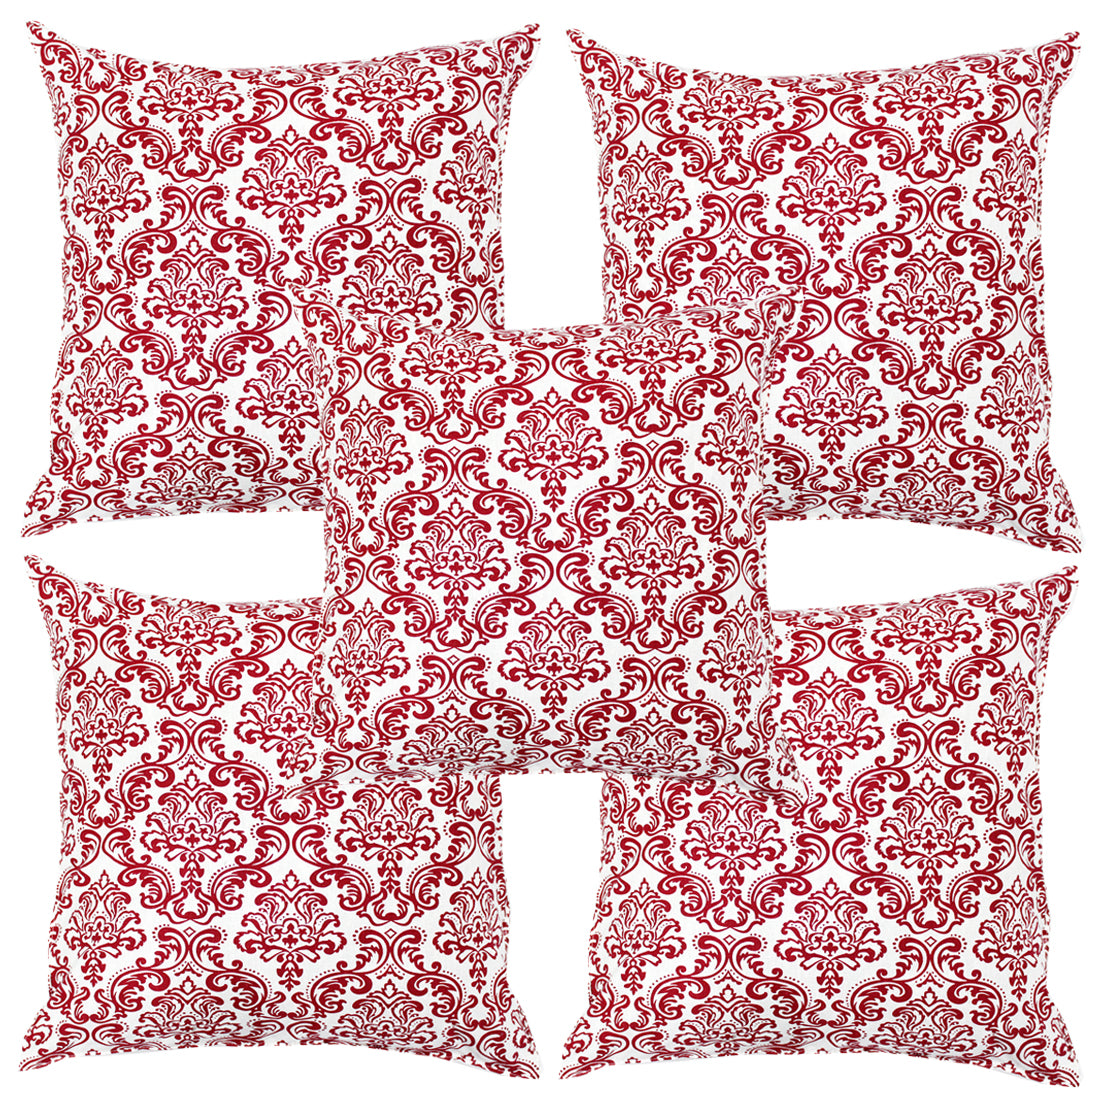 Soft Damask print Maroon Cotton Cushion Cover Set online in India